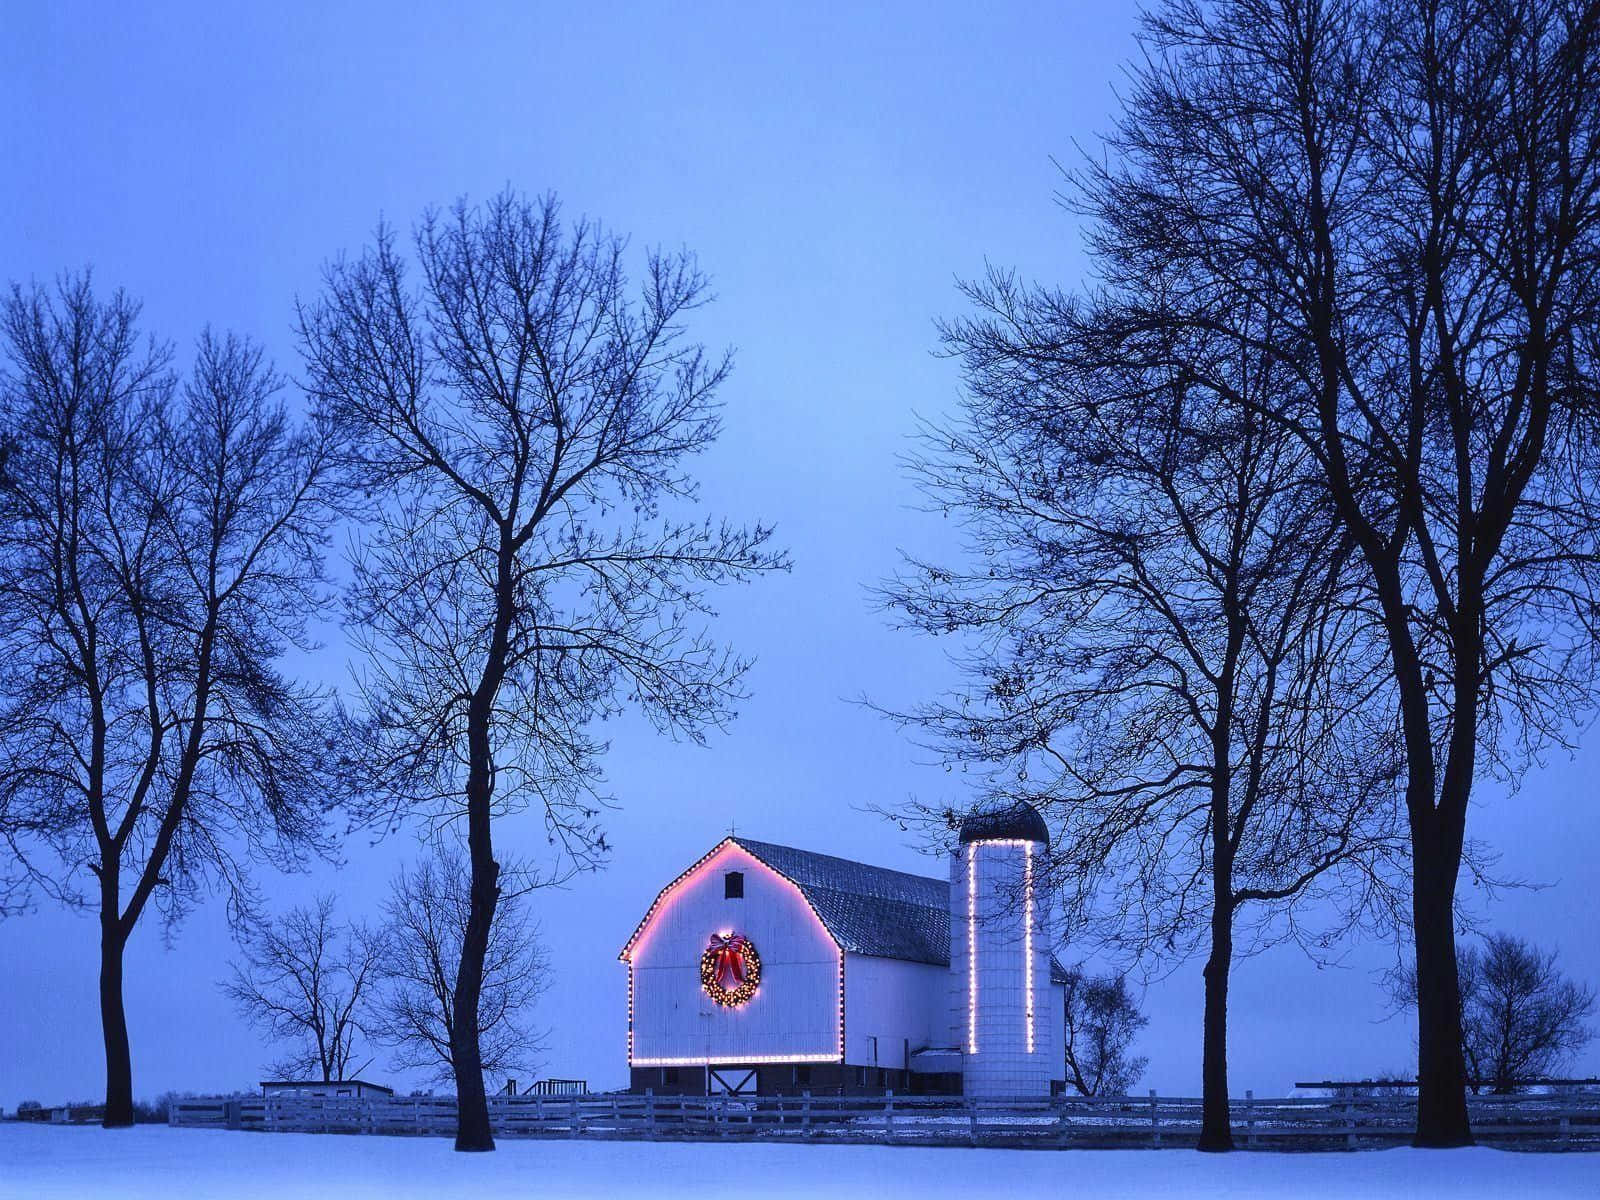 A White Barn Lit Up In The Snow